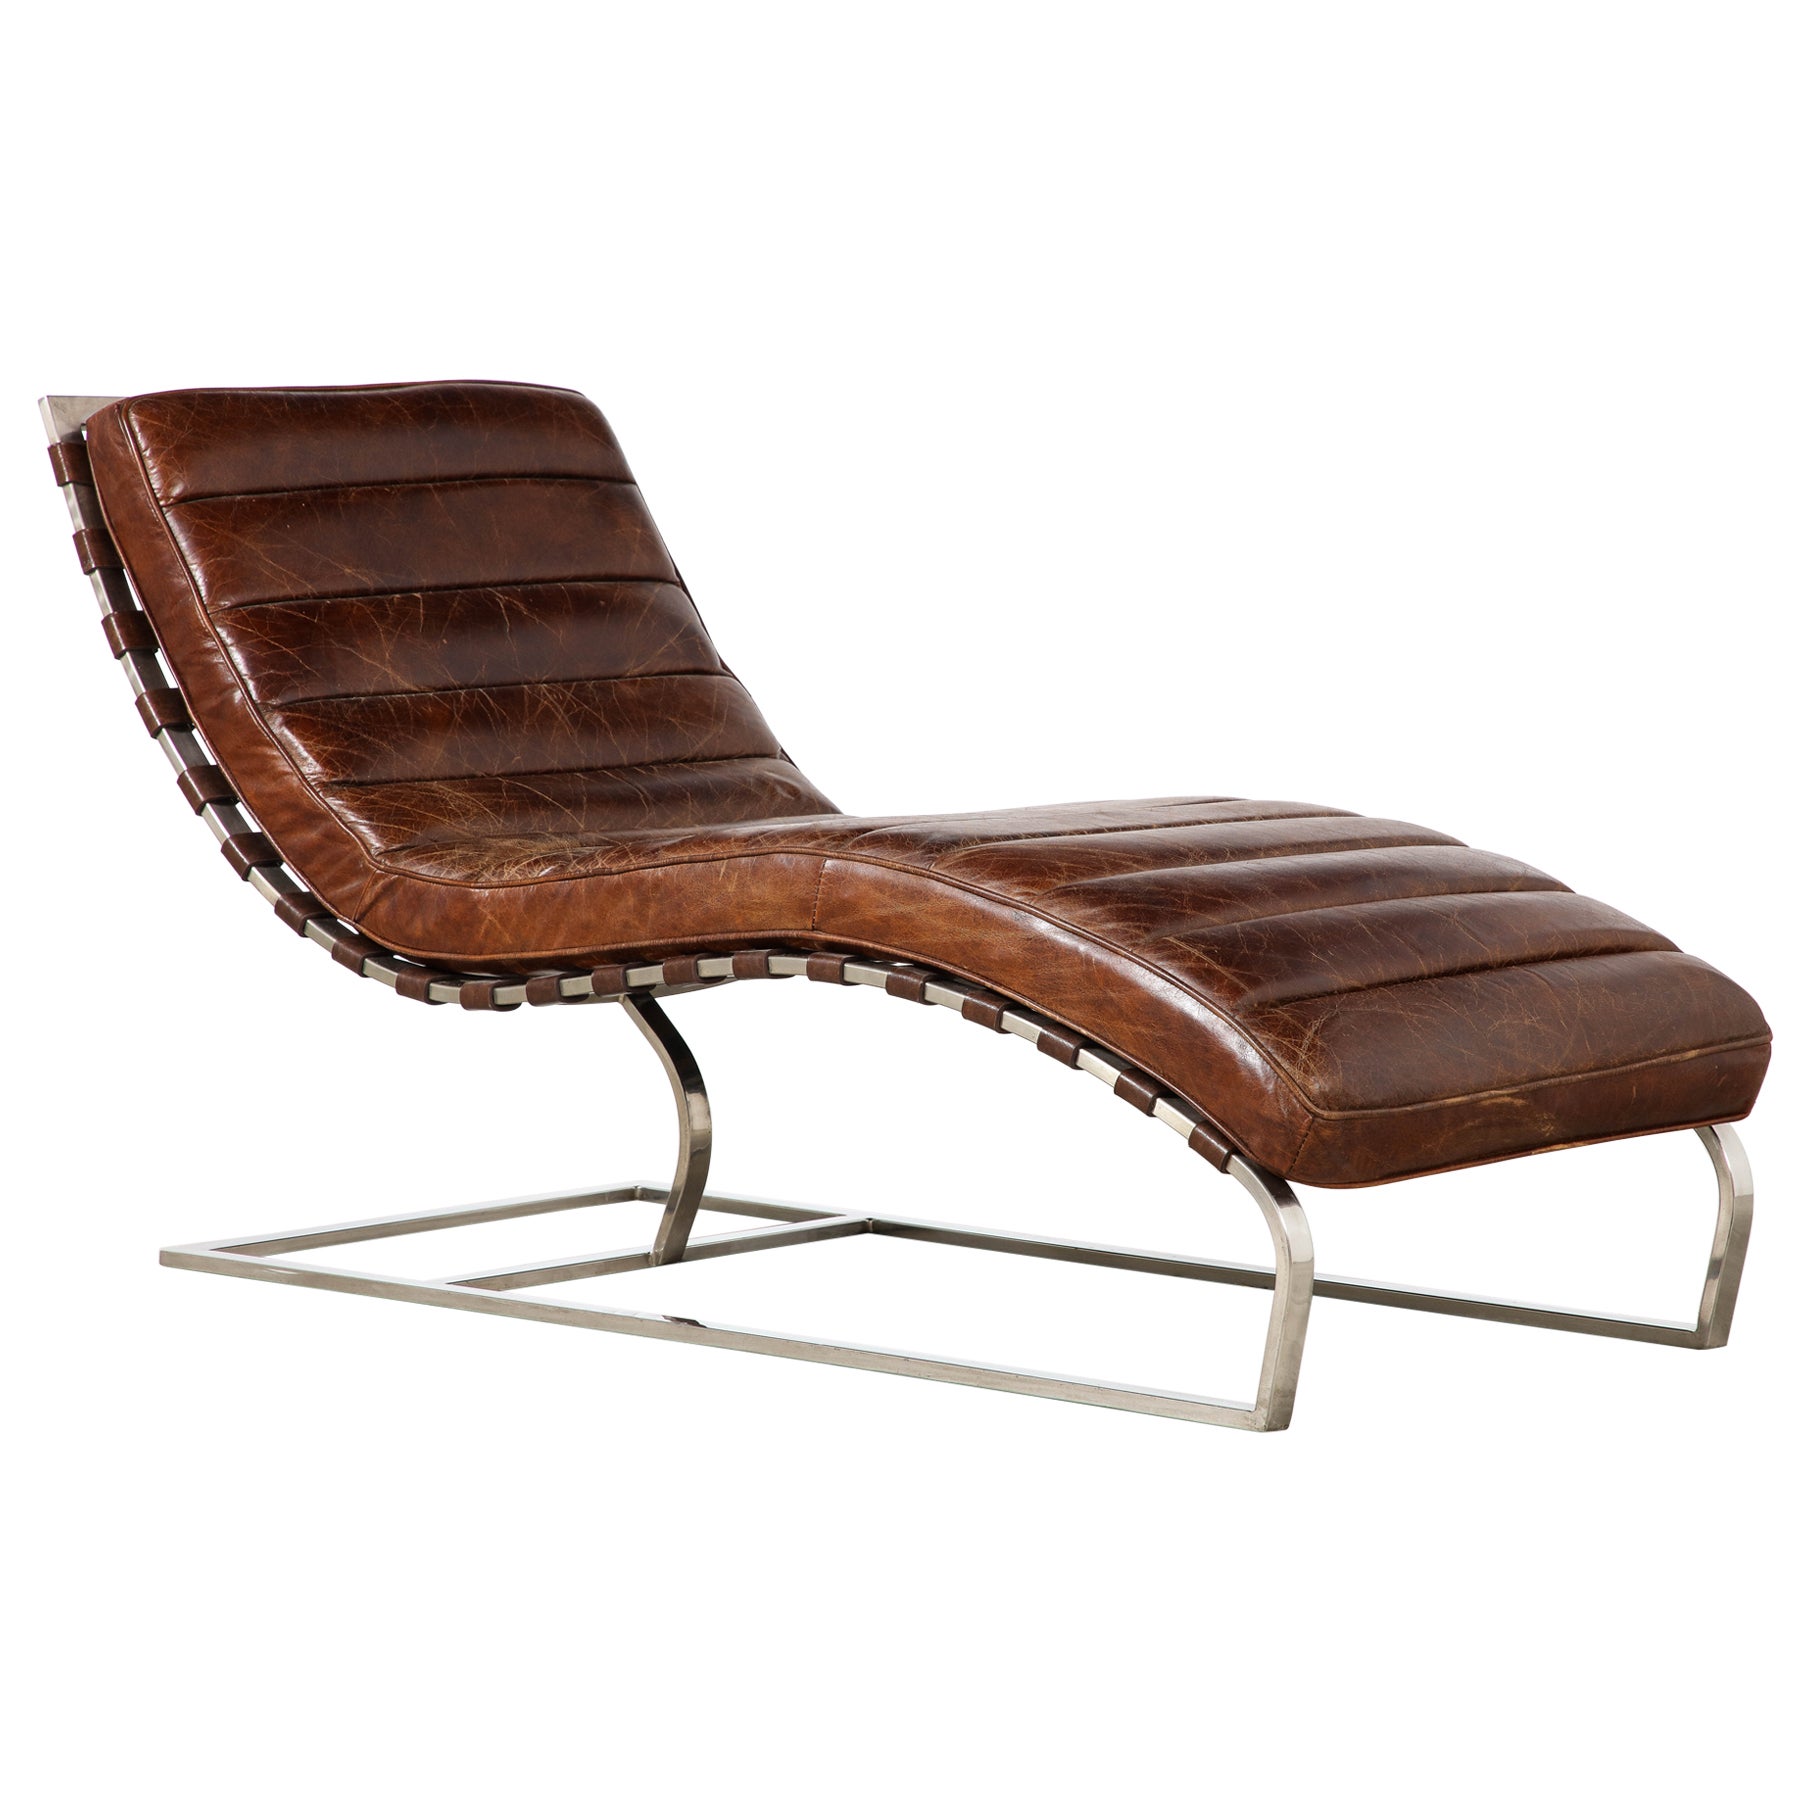 Italian Channeled Leather and Chrome Chaise Longue, 1970